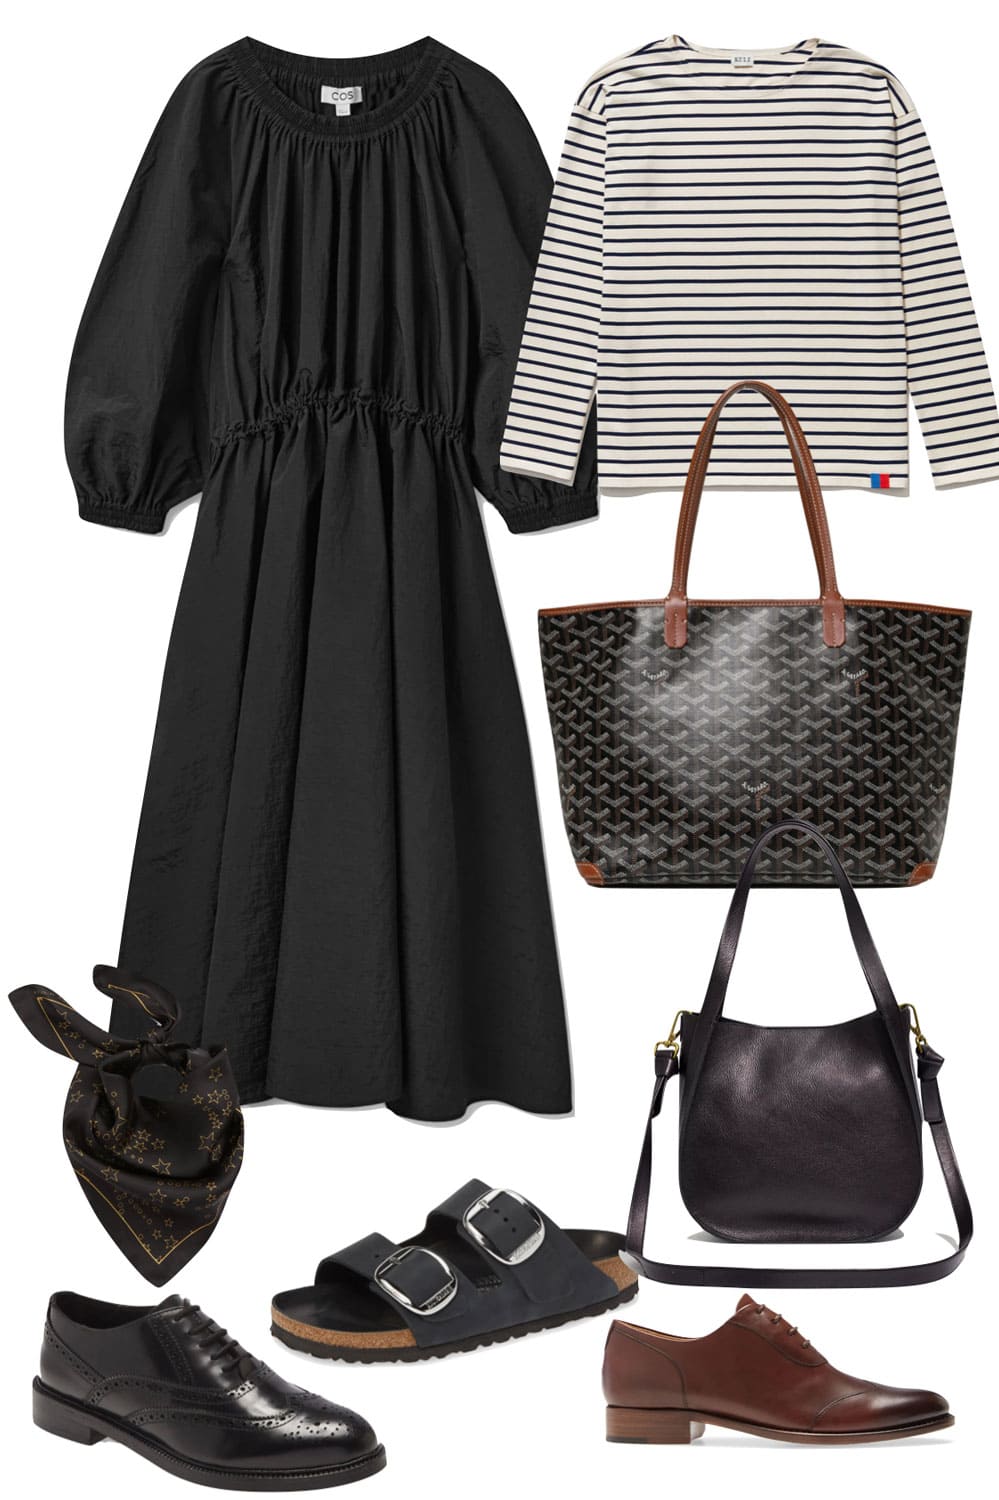 How to Style an All Black Outfit 3 Different Ways